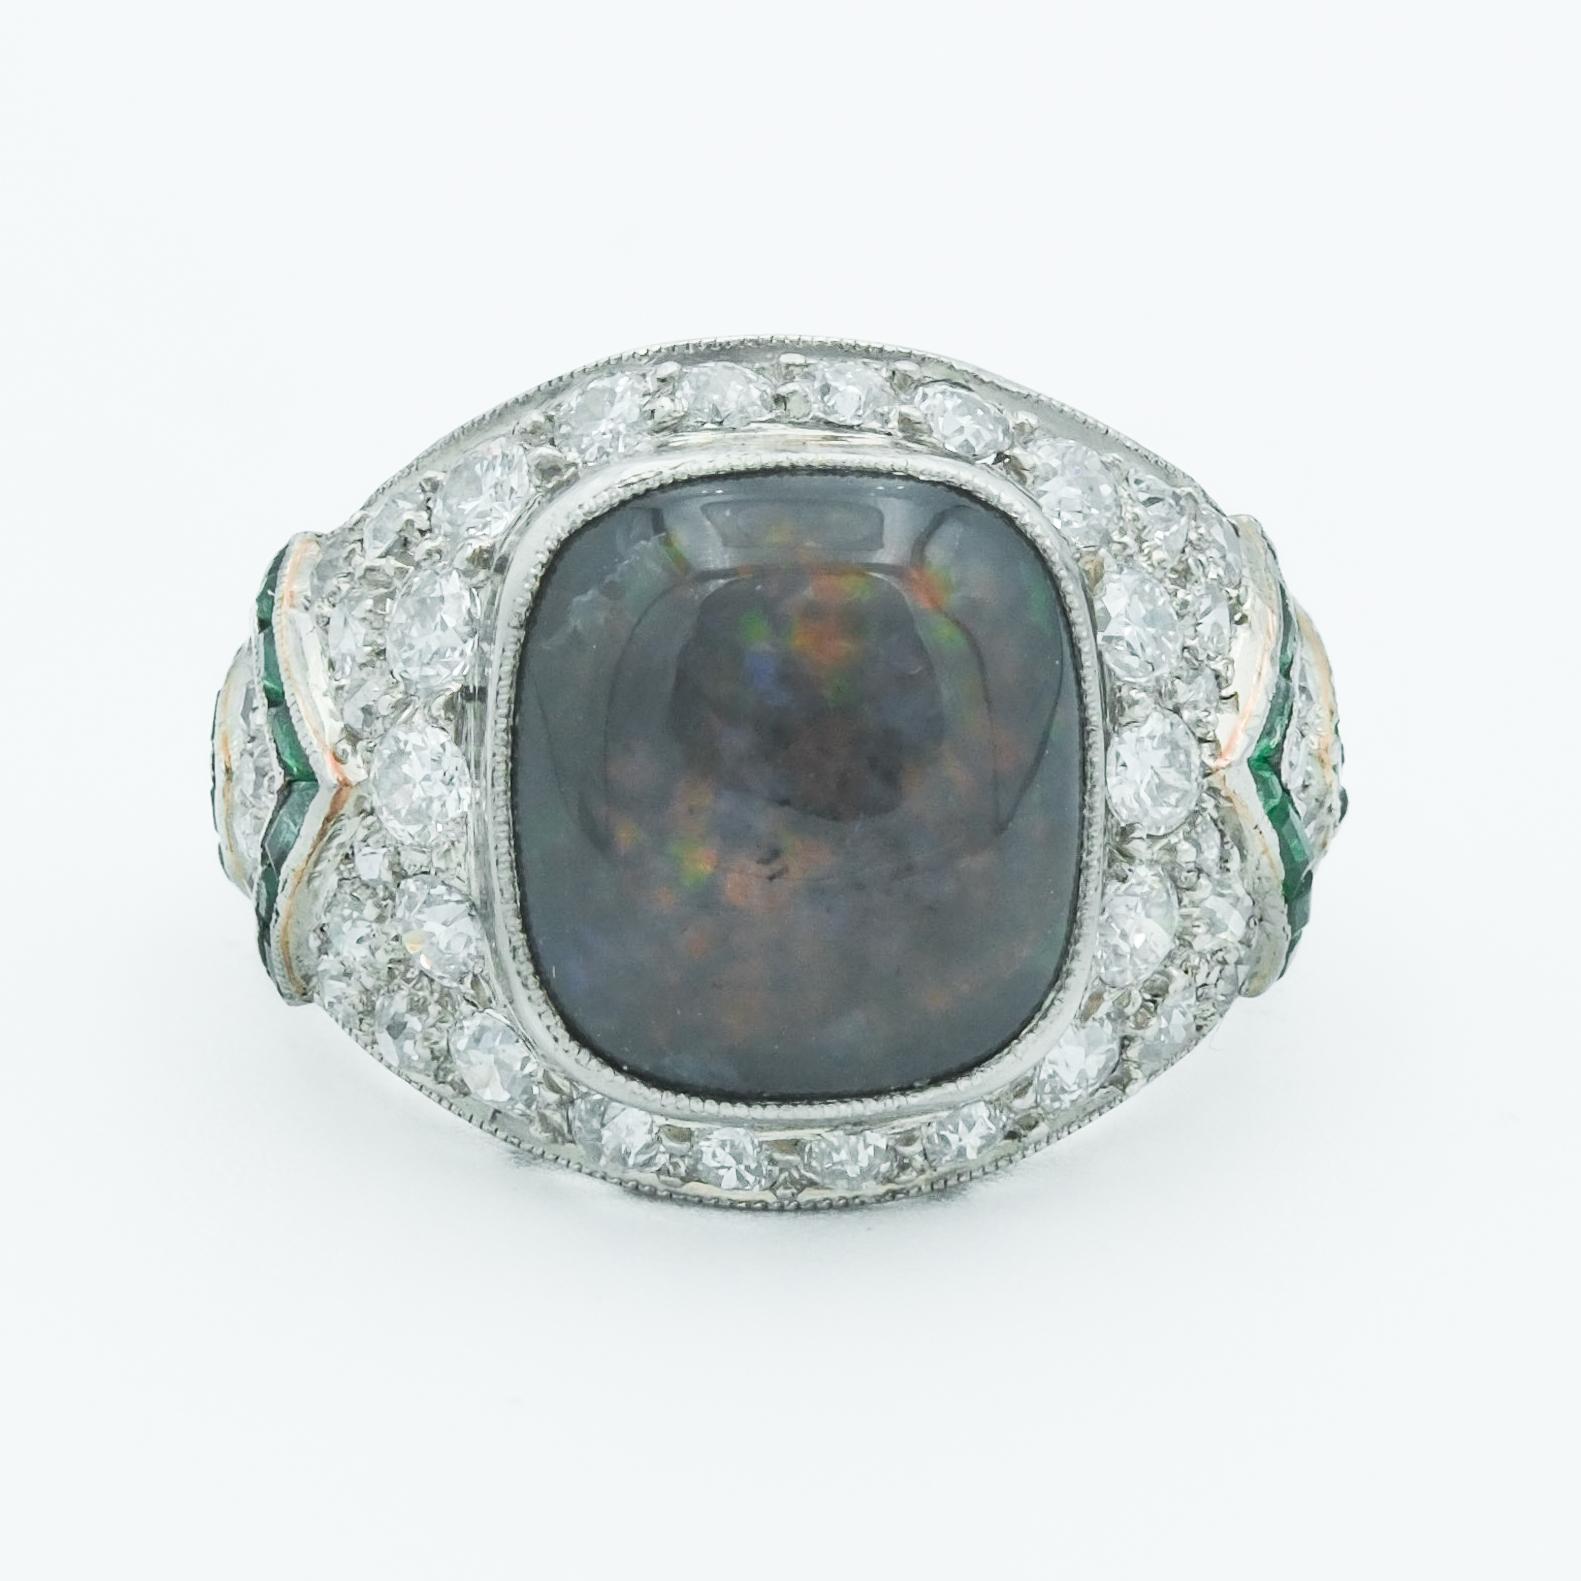 This exquisite platinum Art Deco ring features a stunning 4-carat black opal, which takes center stage as a cabochon cut, exhibiting a mesmerizing play of color, a characteristic for which fine opals are renowned. The opal is complimented by